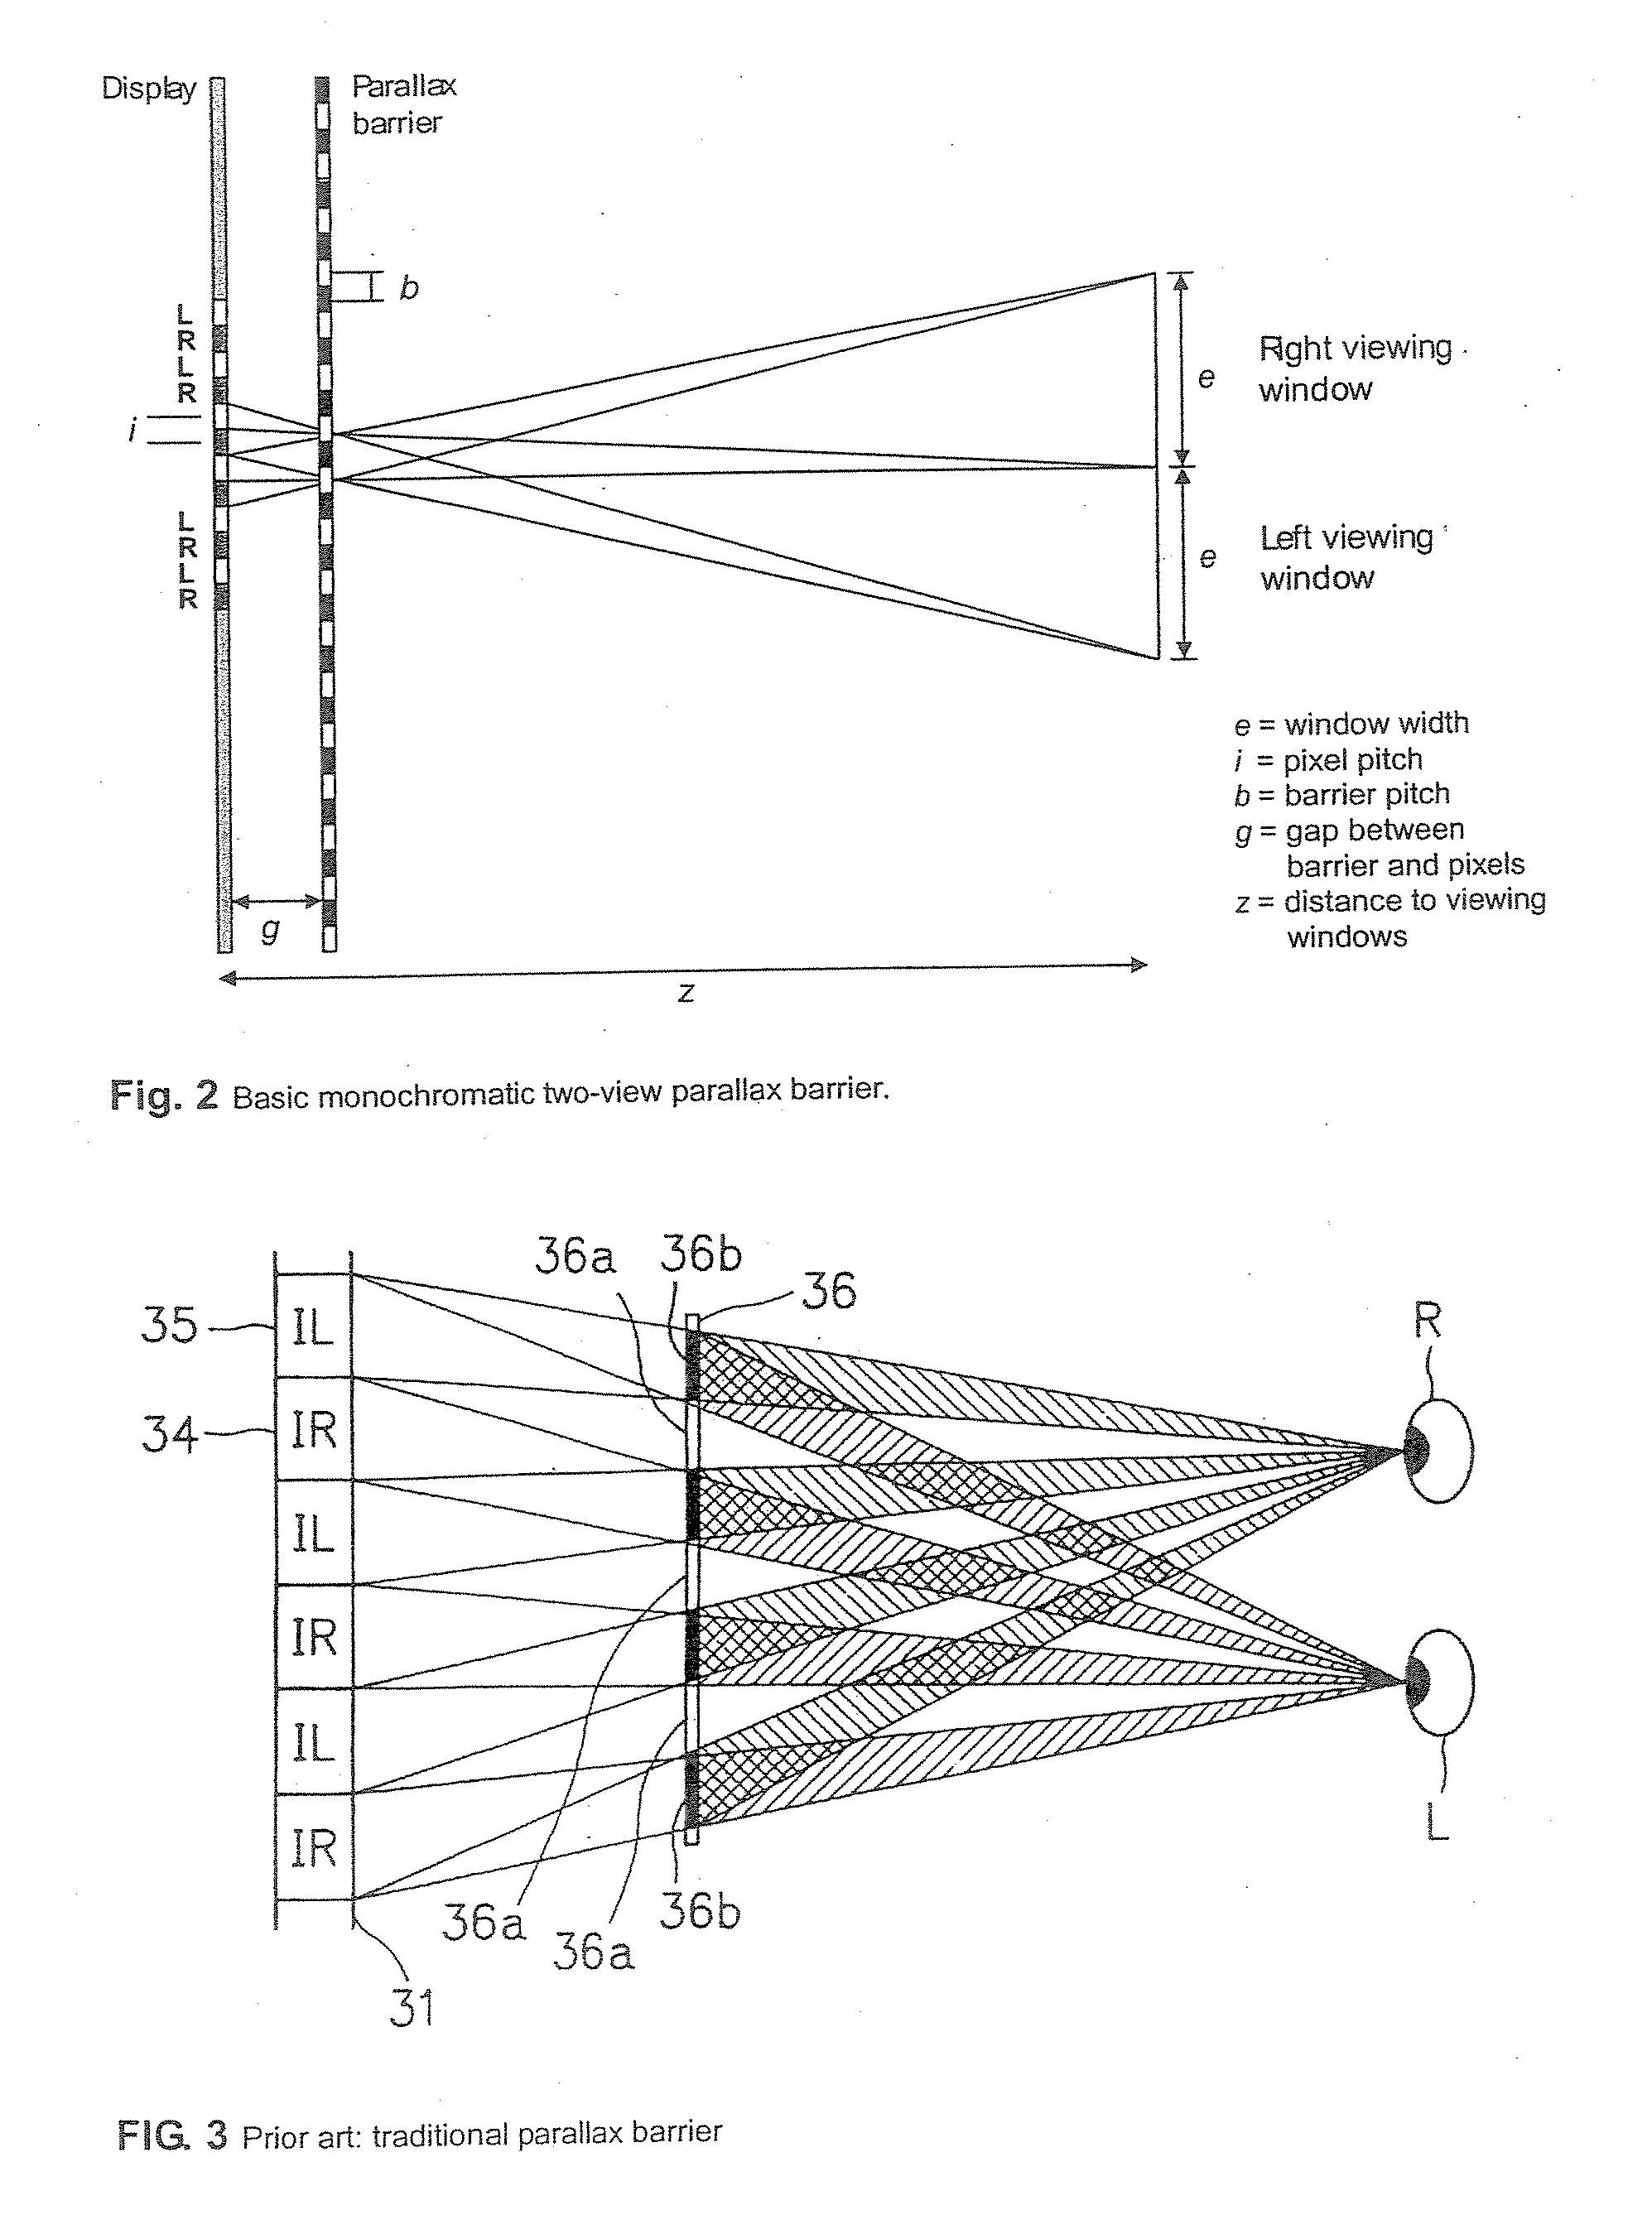 Stereoscopic imaging apparatus incorporating a parallax barrier